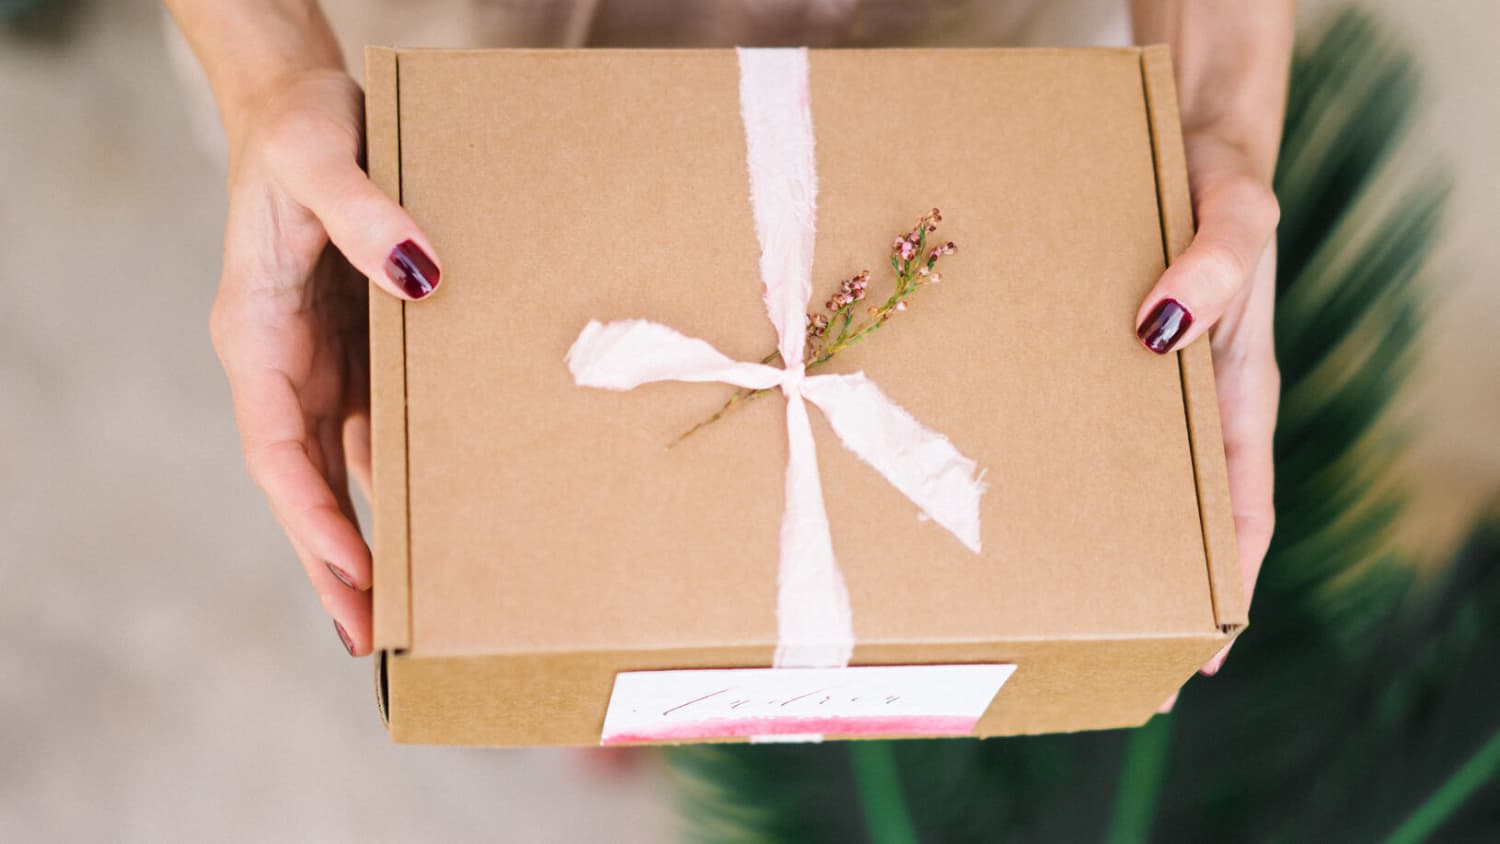 The Perfect Work From Home Gifts and Care Packages